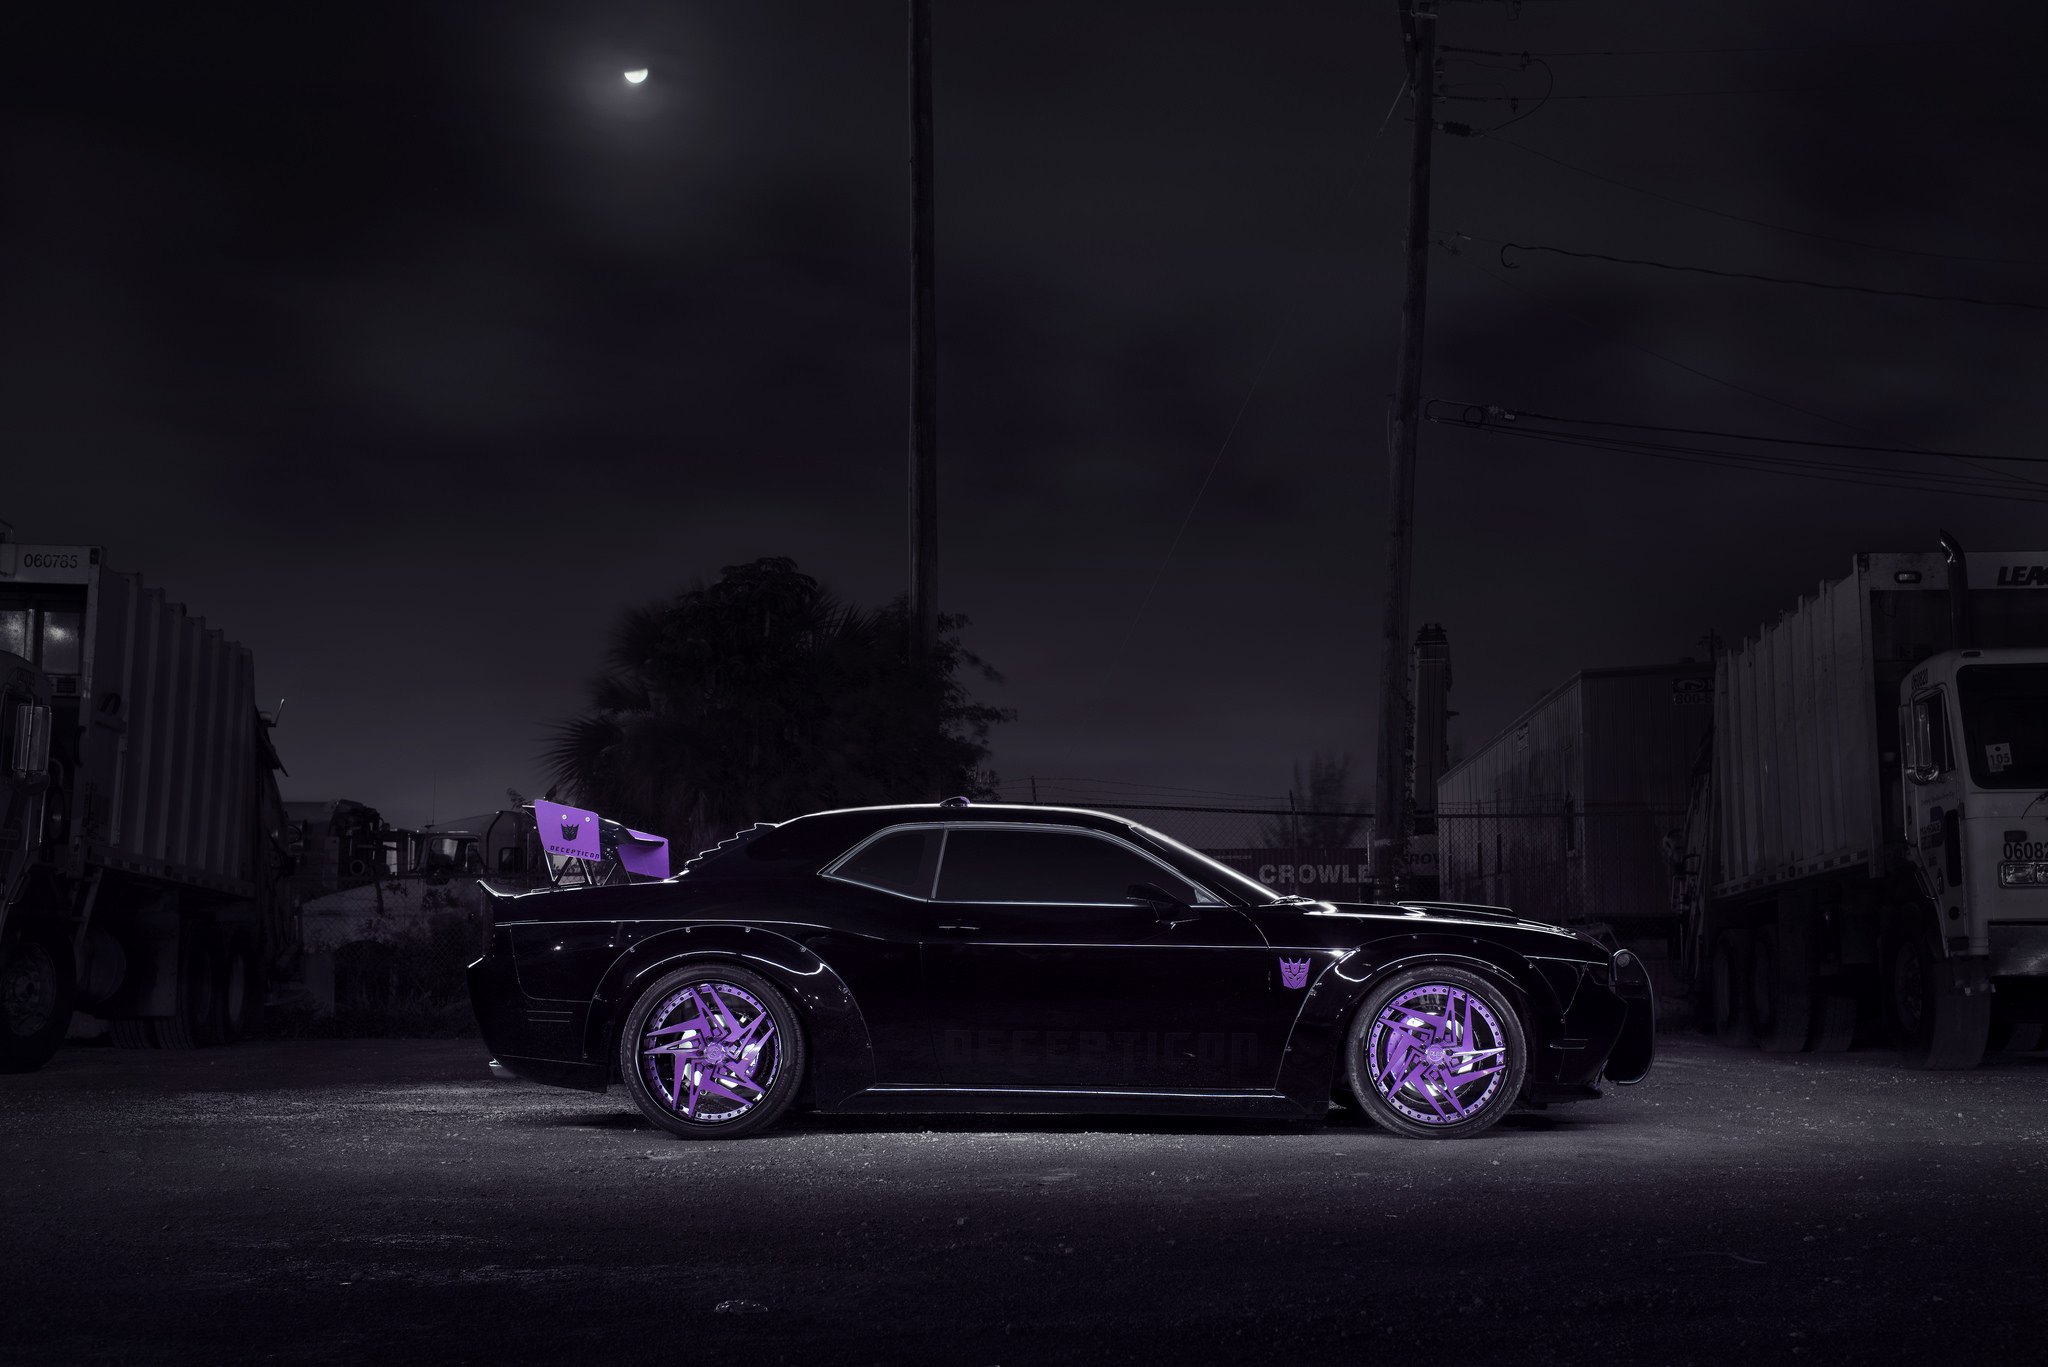 Lowered Black Dodge Challenger with Fender Flares - Photo by DUB